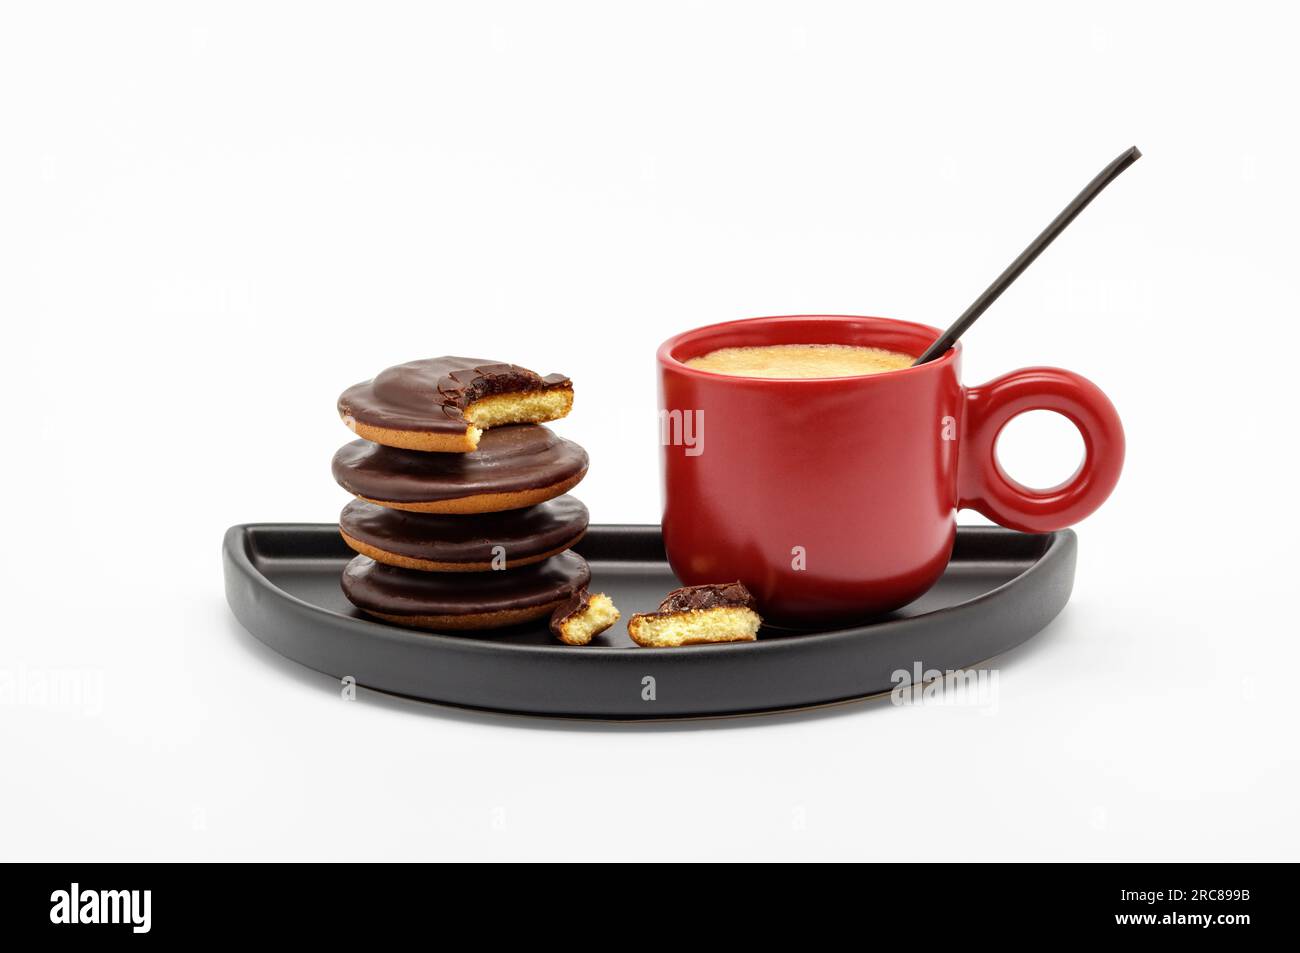 Red espresso cup filled with strong coffee and some biscuits on black dish isolated on white background Stock Photo